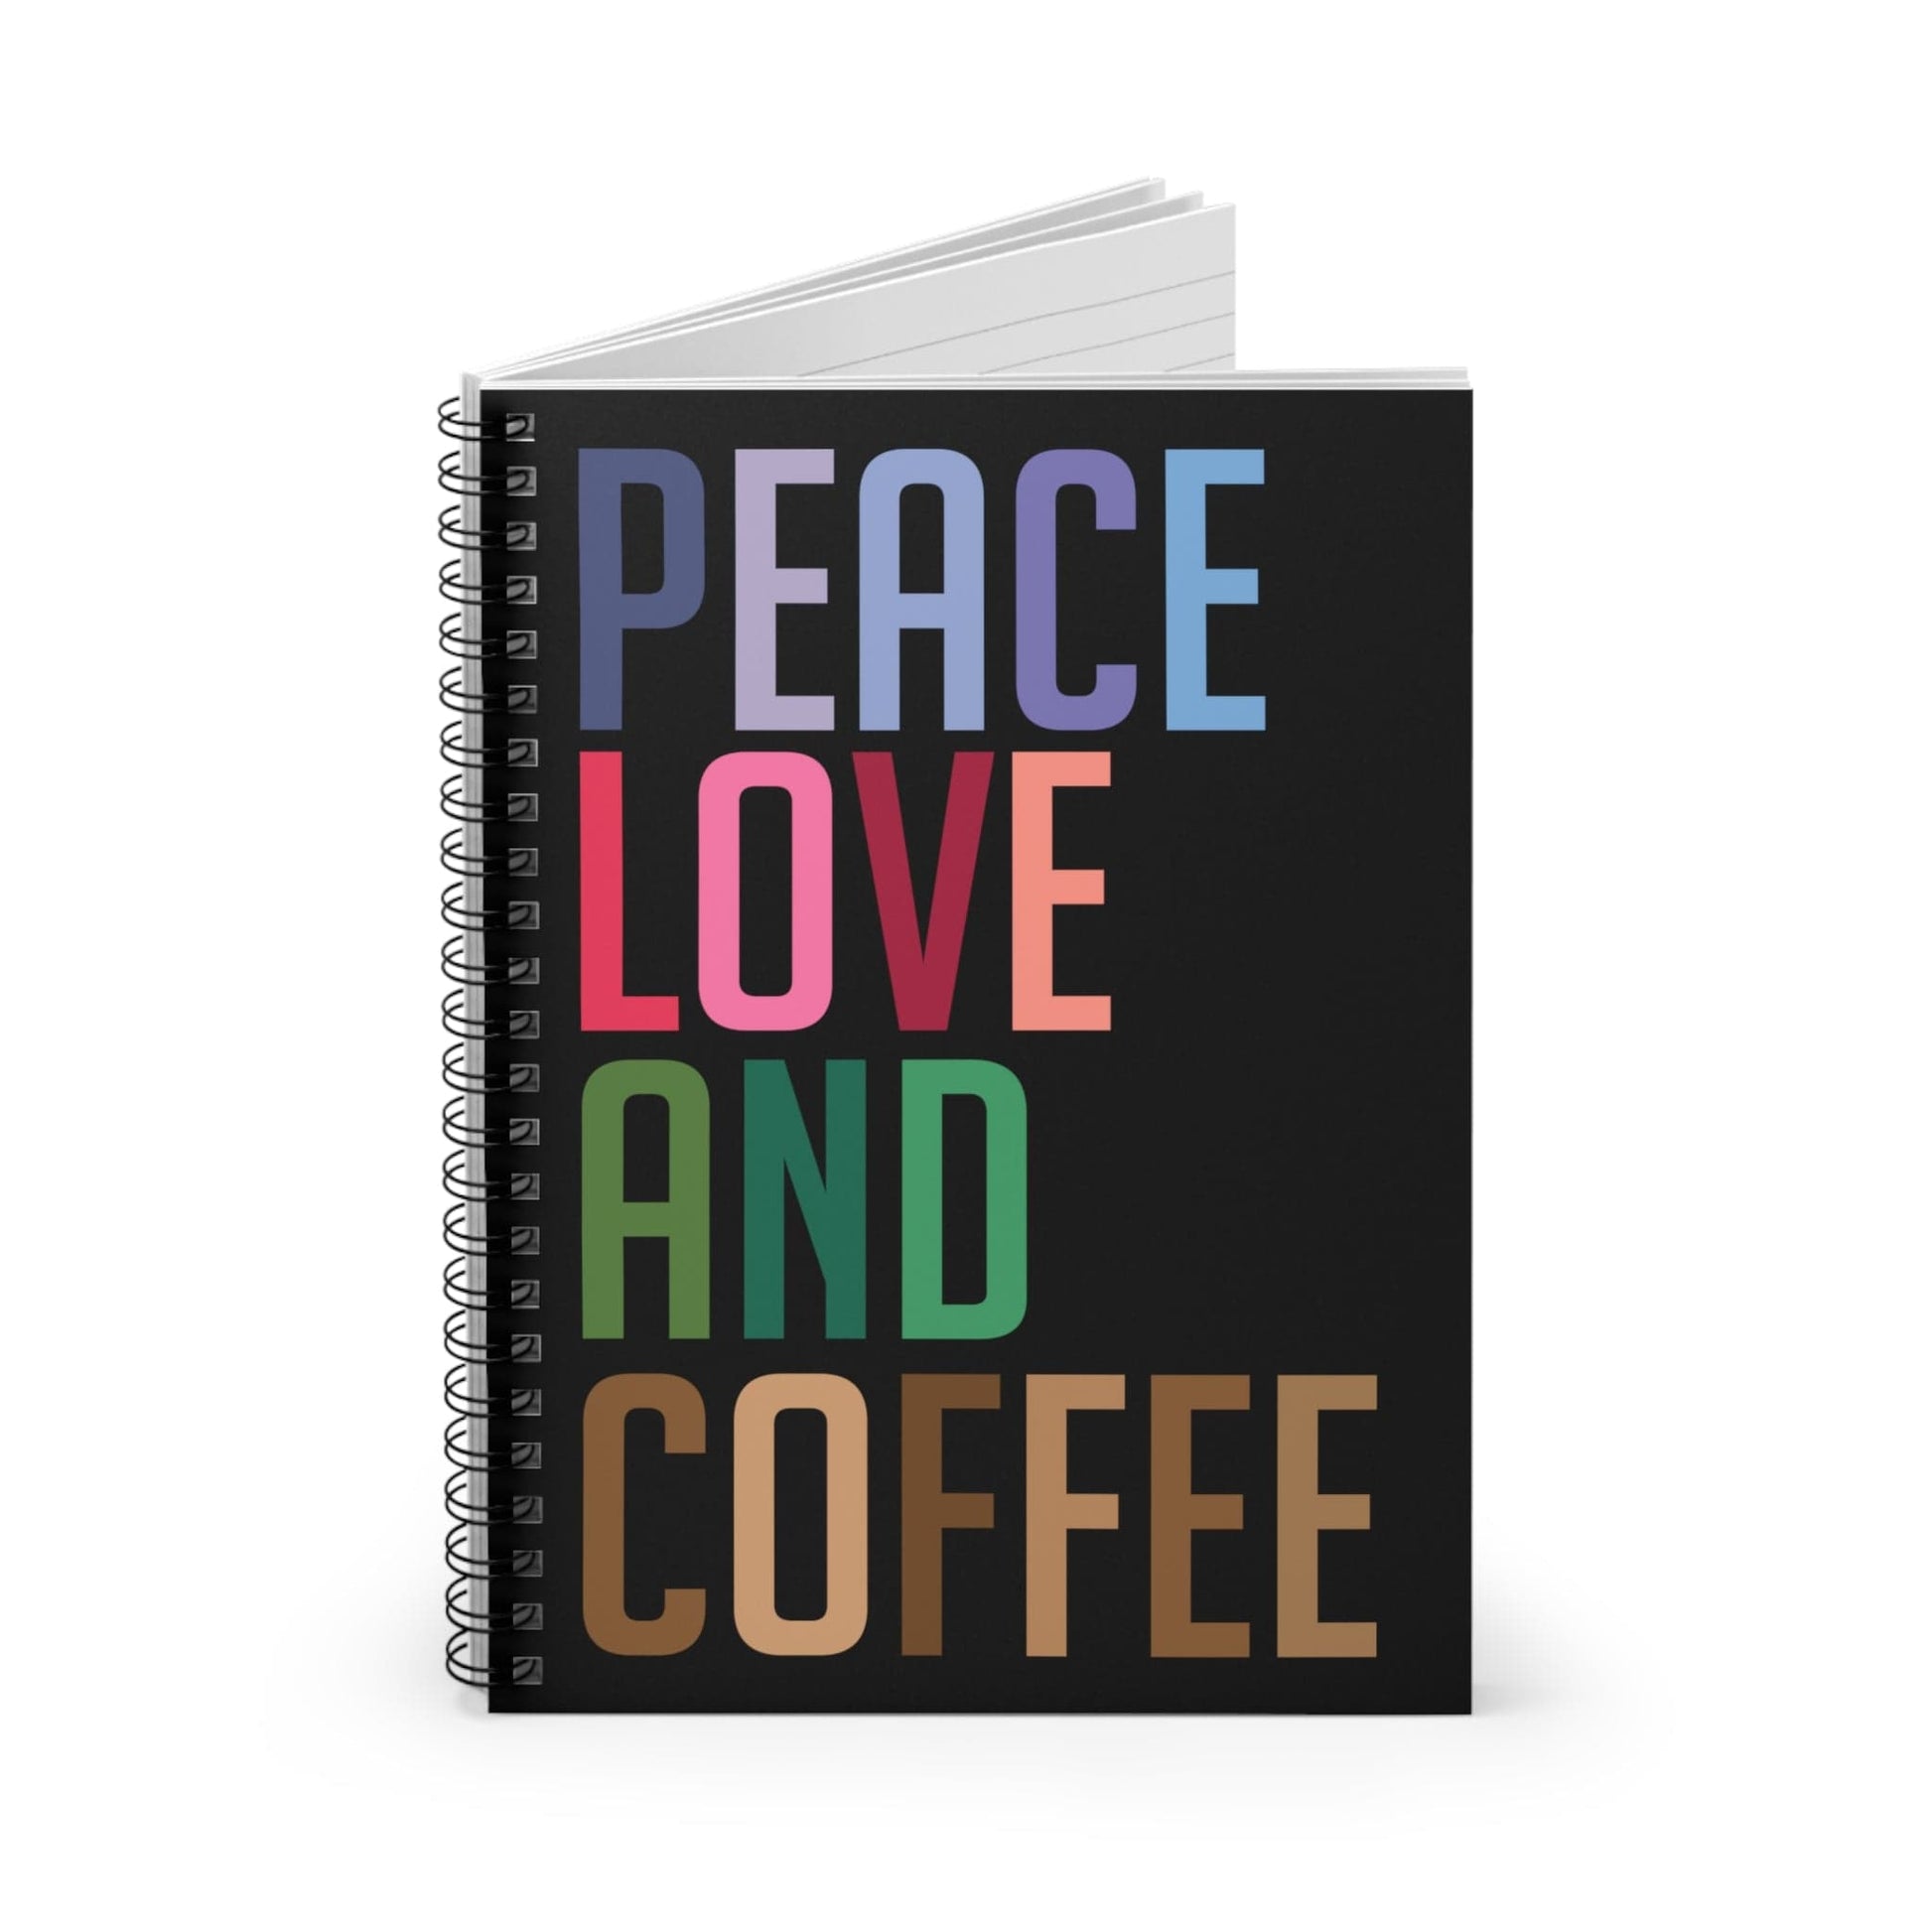 Good Bean Gifts "PEACE LOVE and COFFE" - Spiral Notebook - Ruled Line One Size